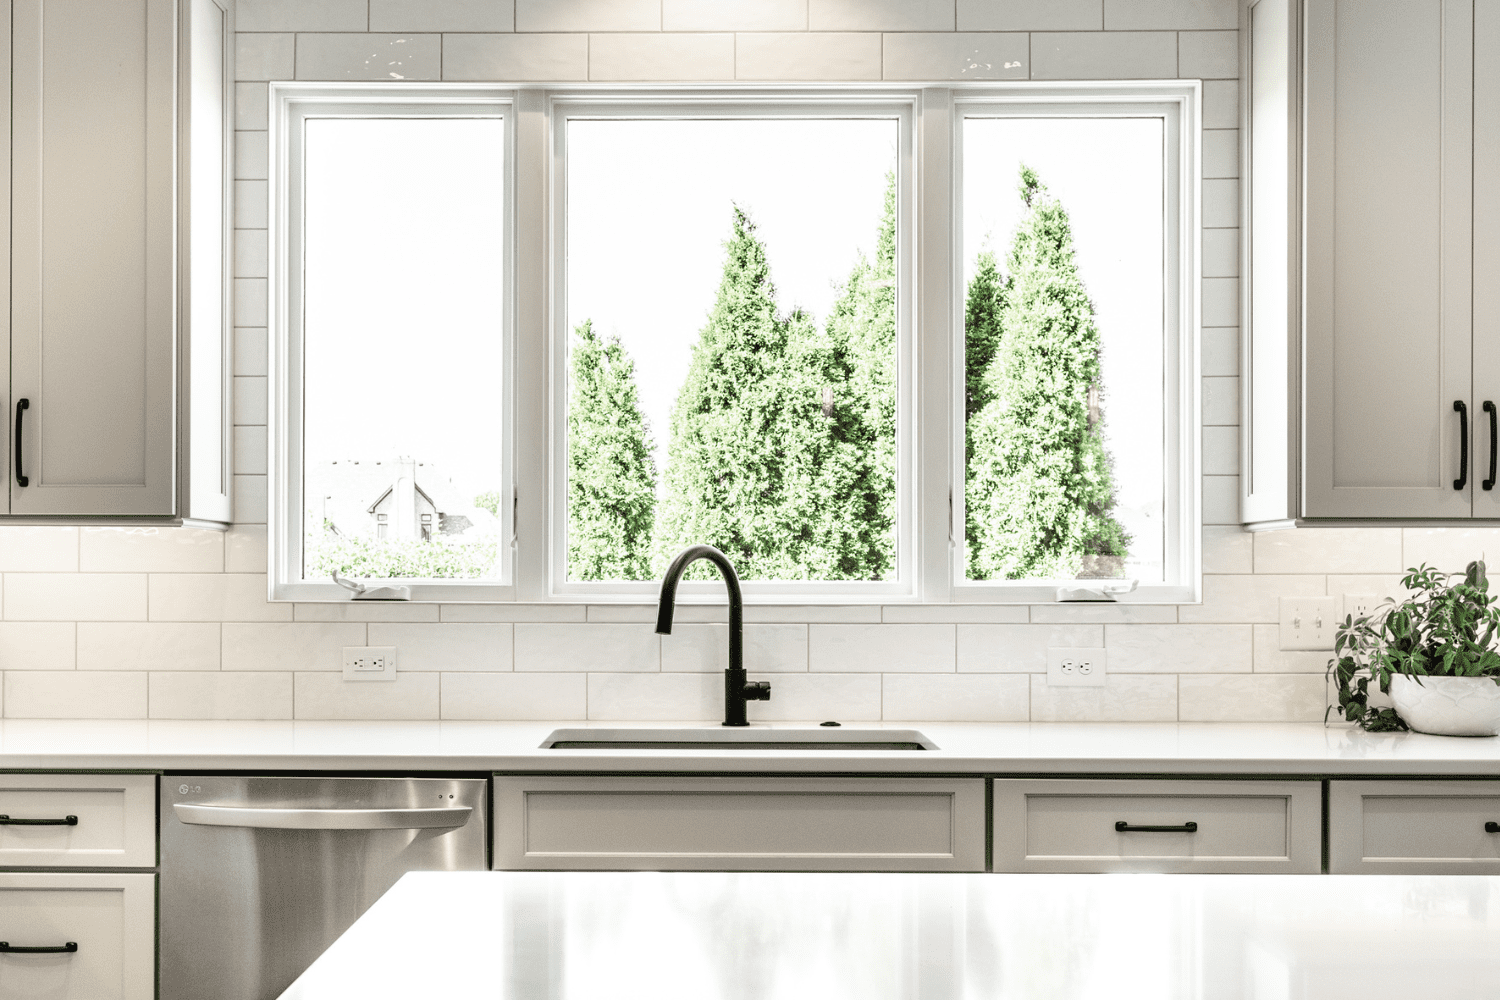 Nicholas Design Build | A kitchen with white cabinets and a window.